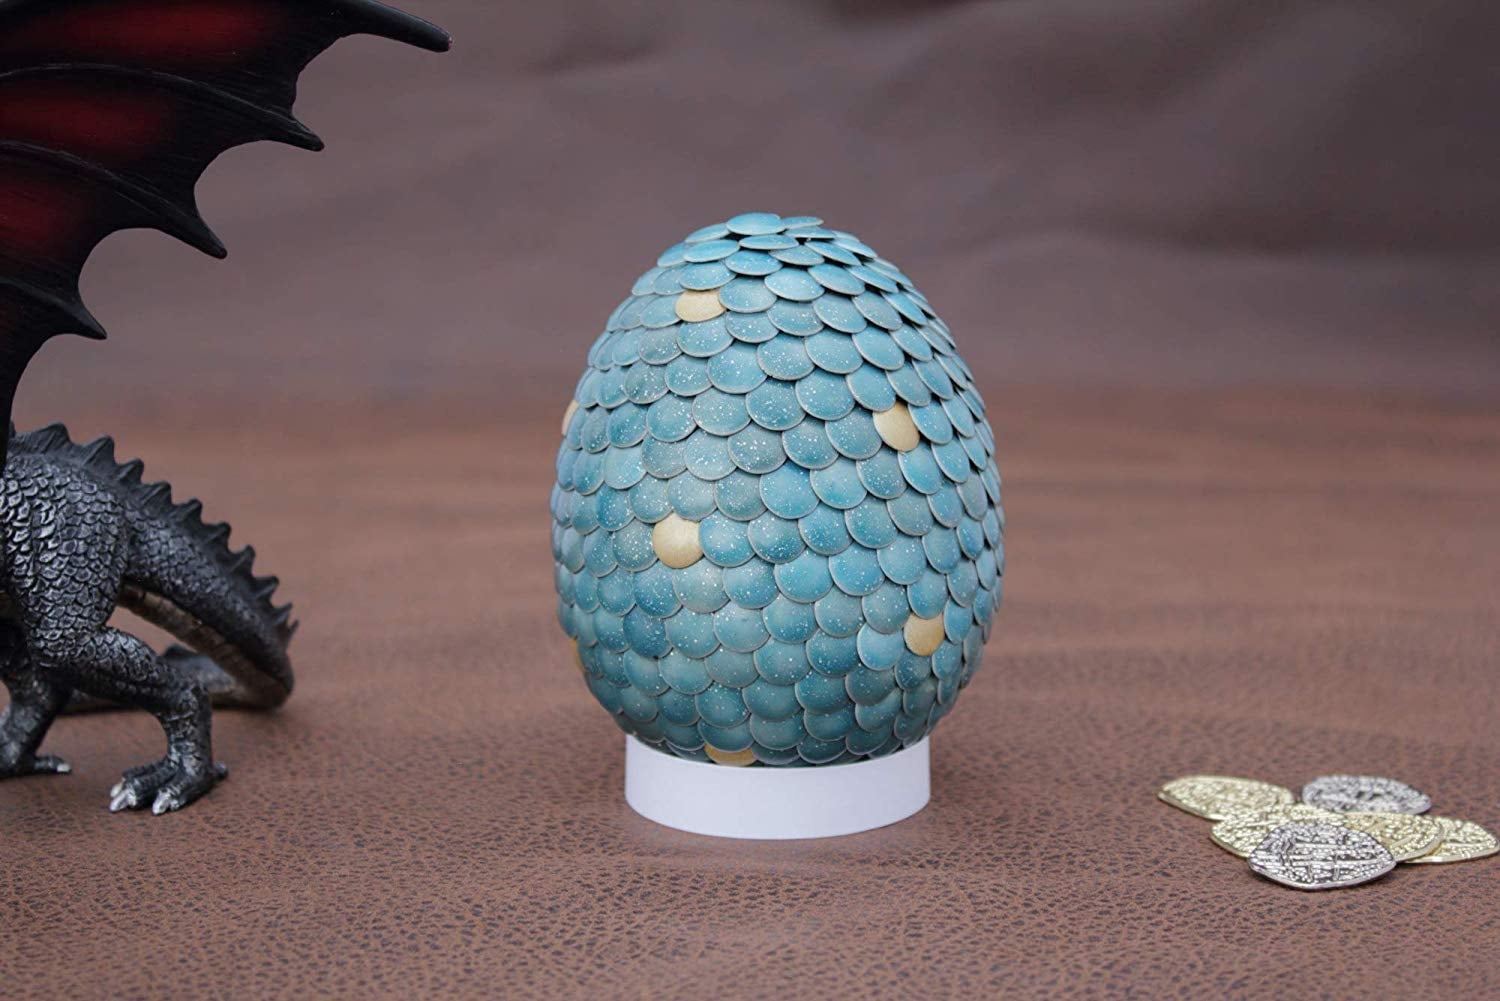 game of thrones dragon eggs colors